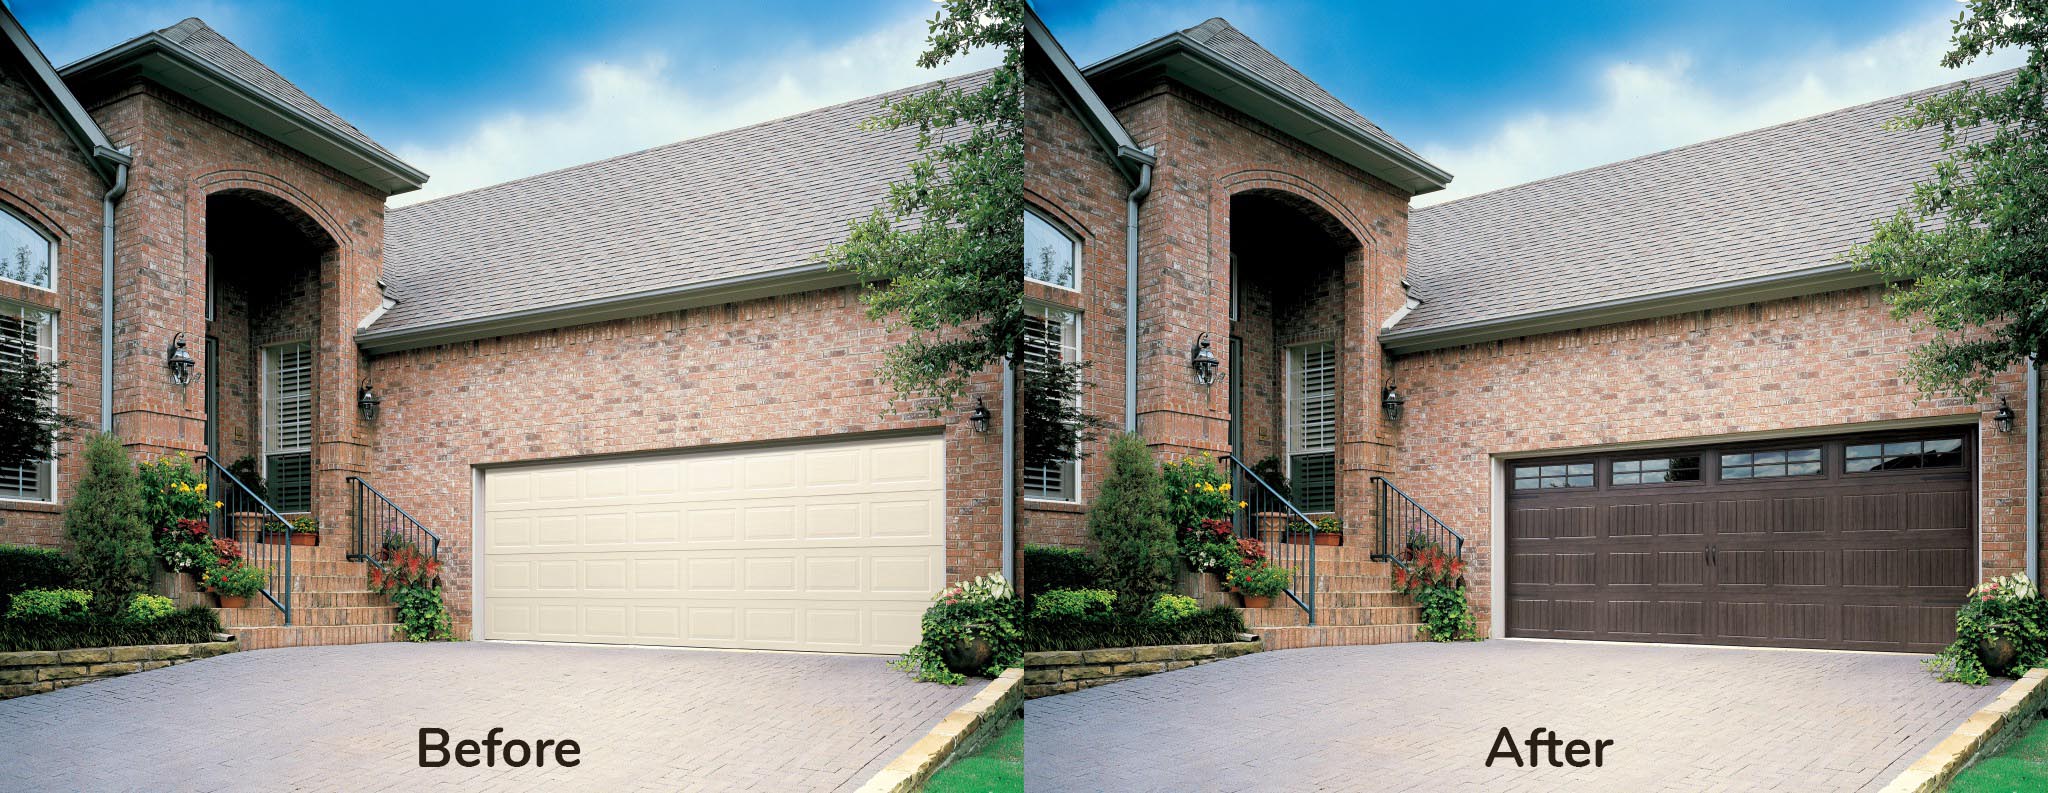 Before and After comparison of the impact of a new garage door with Overhead Door Company of Knoxville.